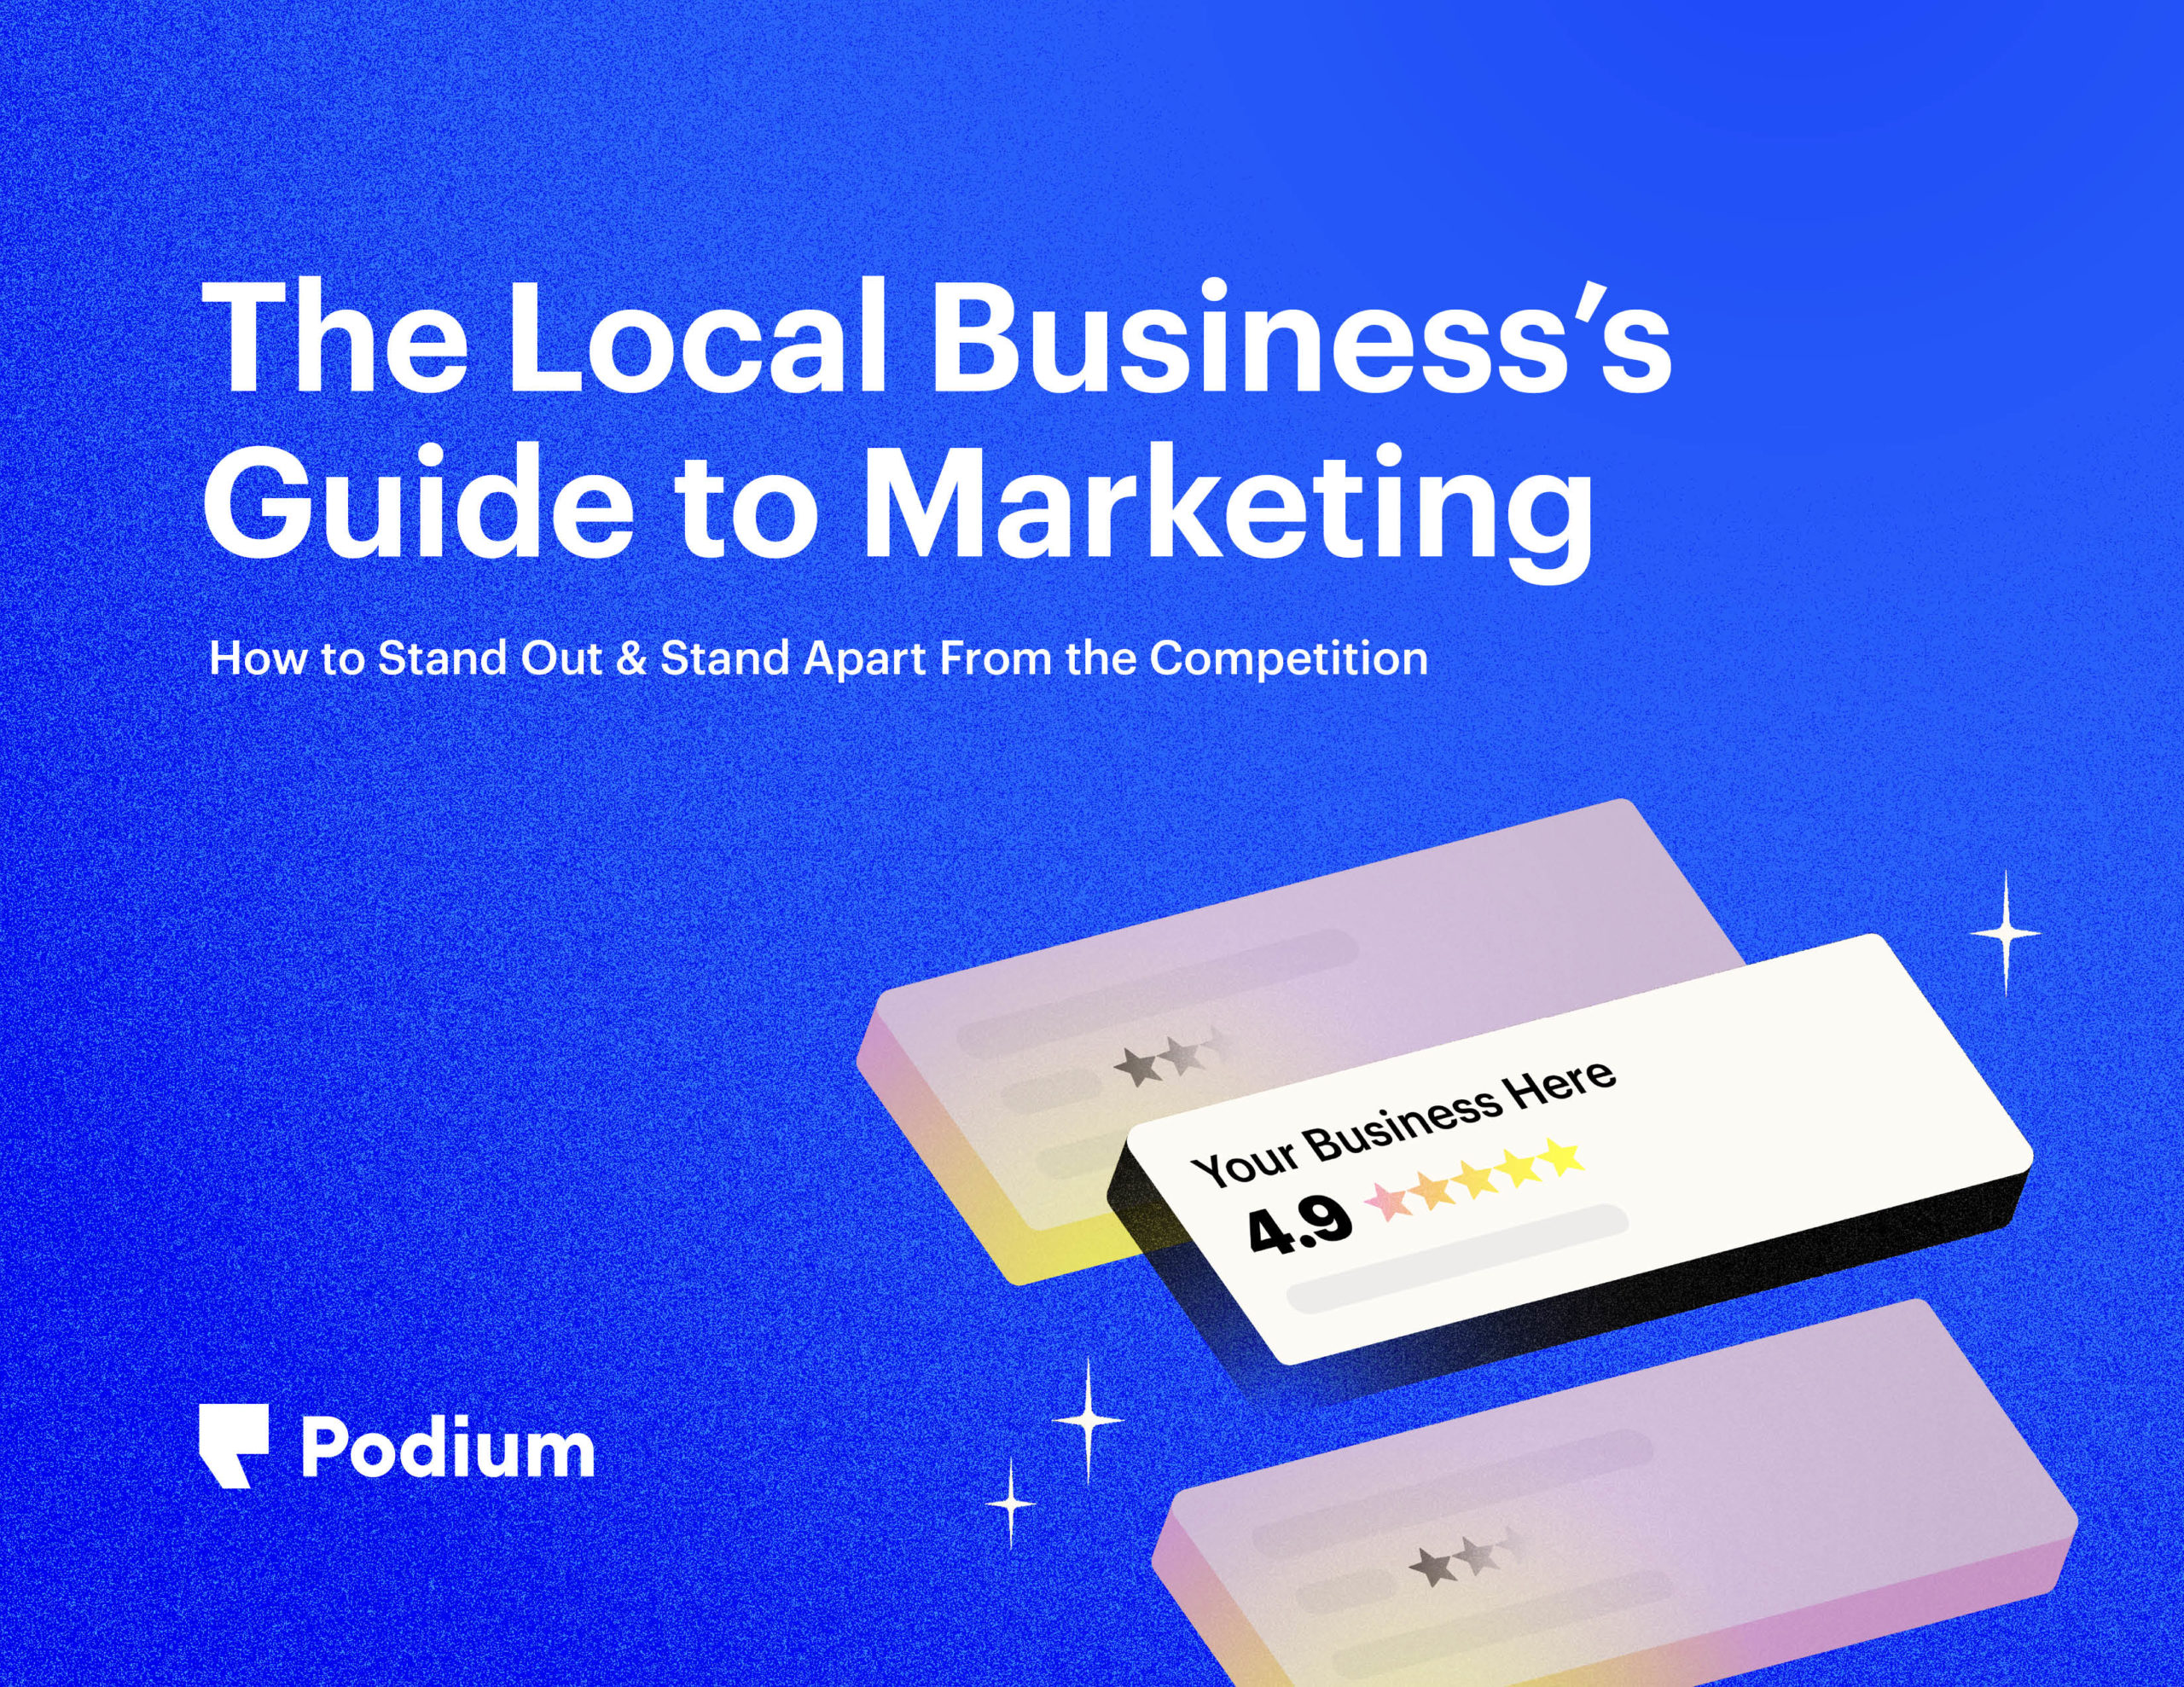 The Local Business’s Guide to Marketing